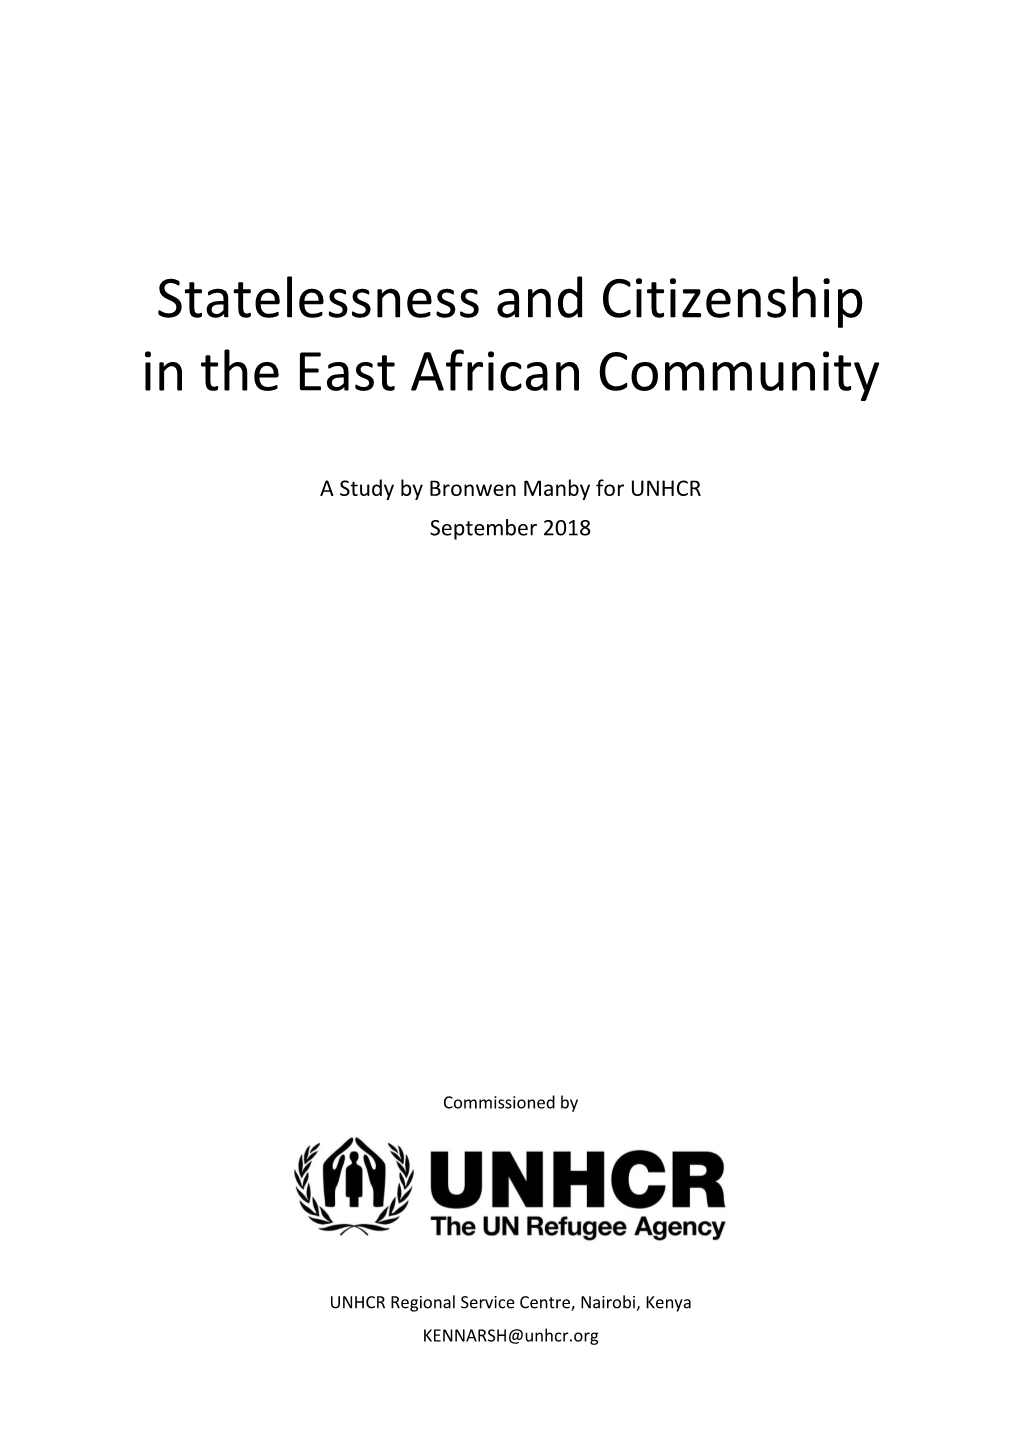 Statelessness and Citizenship in the East African Community